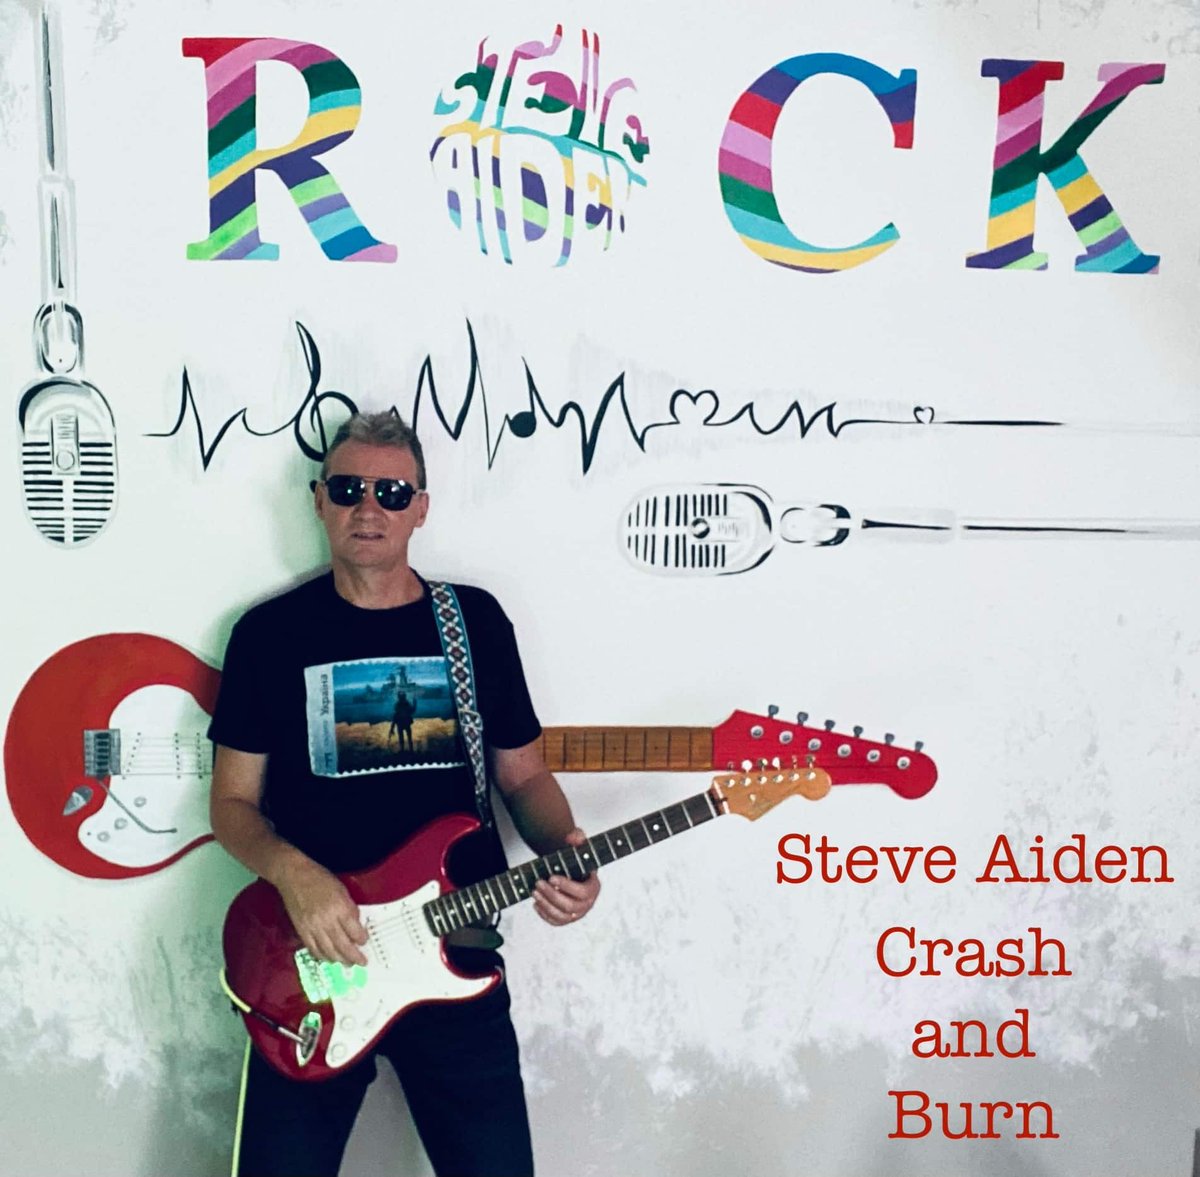 Now Playing on RADIO WIGWAM - 'Crash and Burn' by Steve Aiden. Listen at radiowigwam.co.uk/bands/steve-ai… @SongsStevie radiowigwam.co.uk